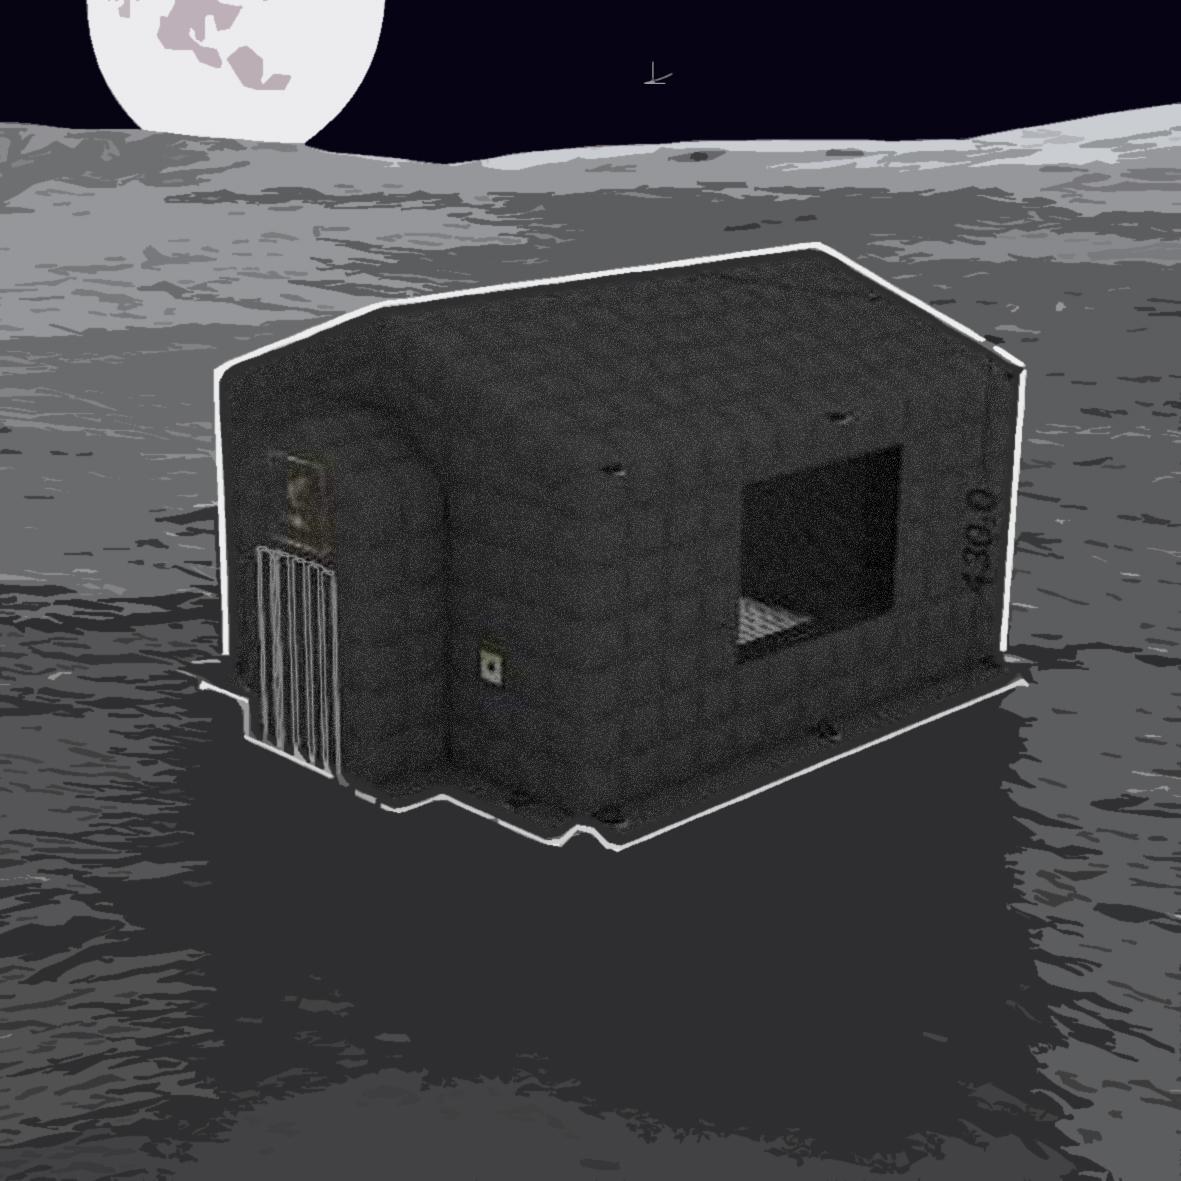 A picture showing a 3D sketch of the VIRES tent on a moon-like surface.